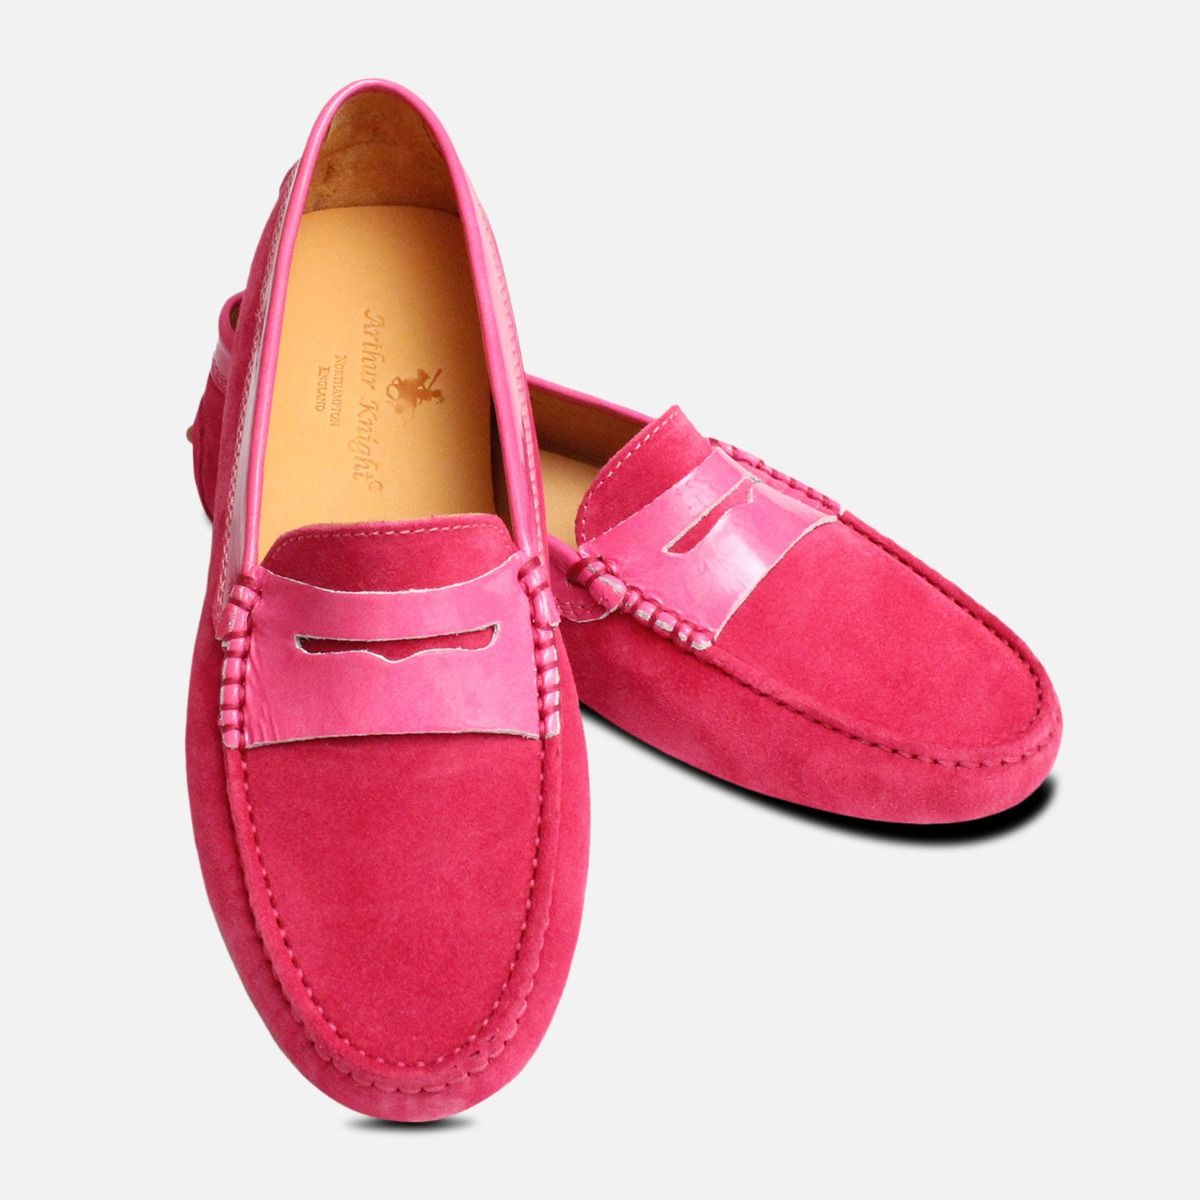 pink suede shoes